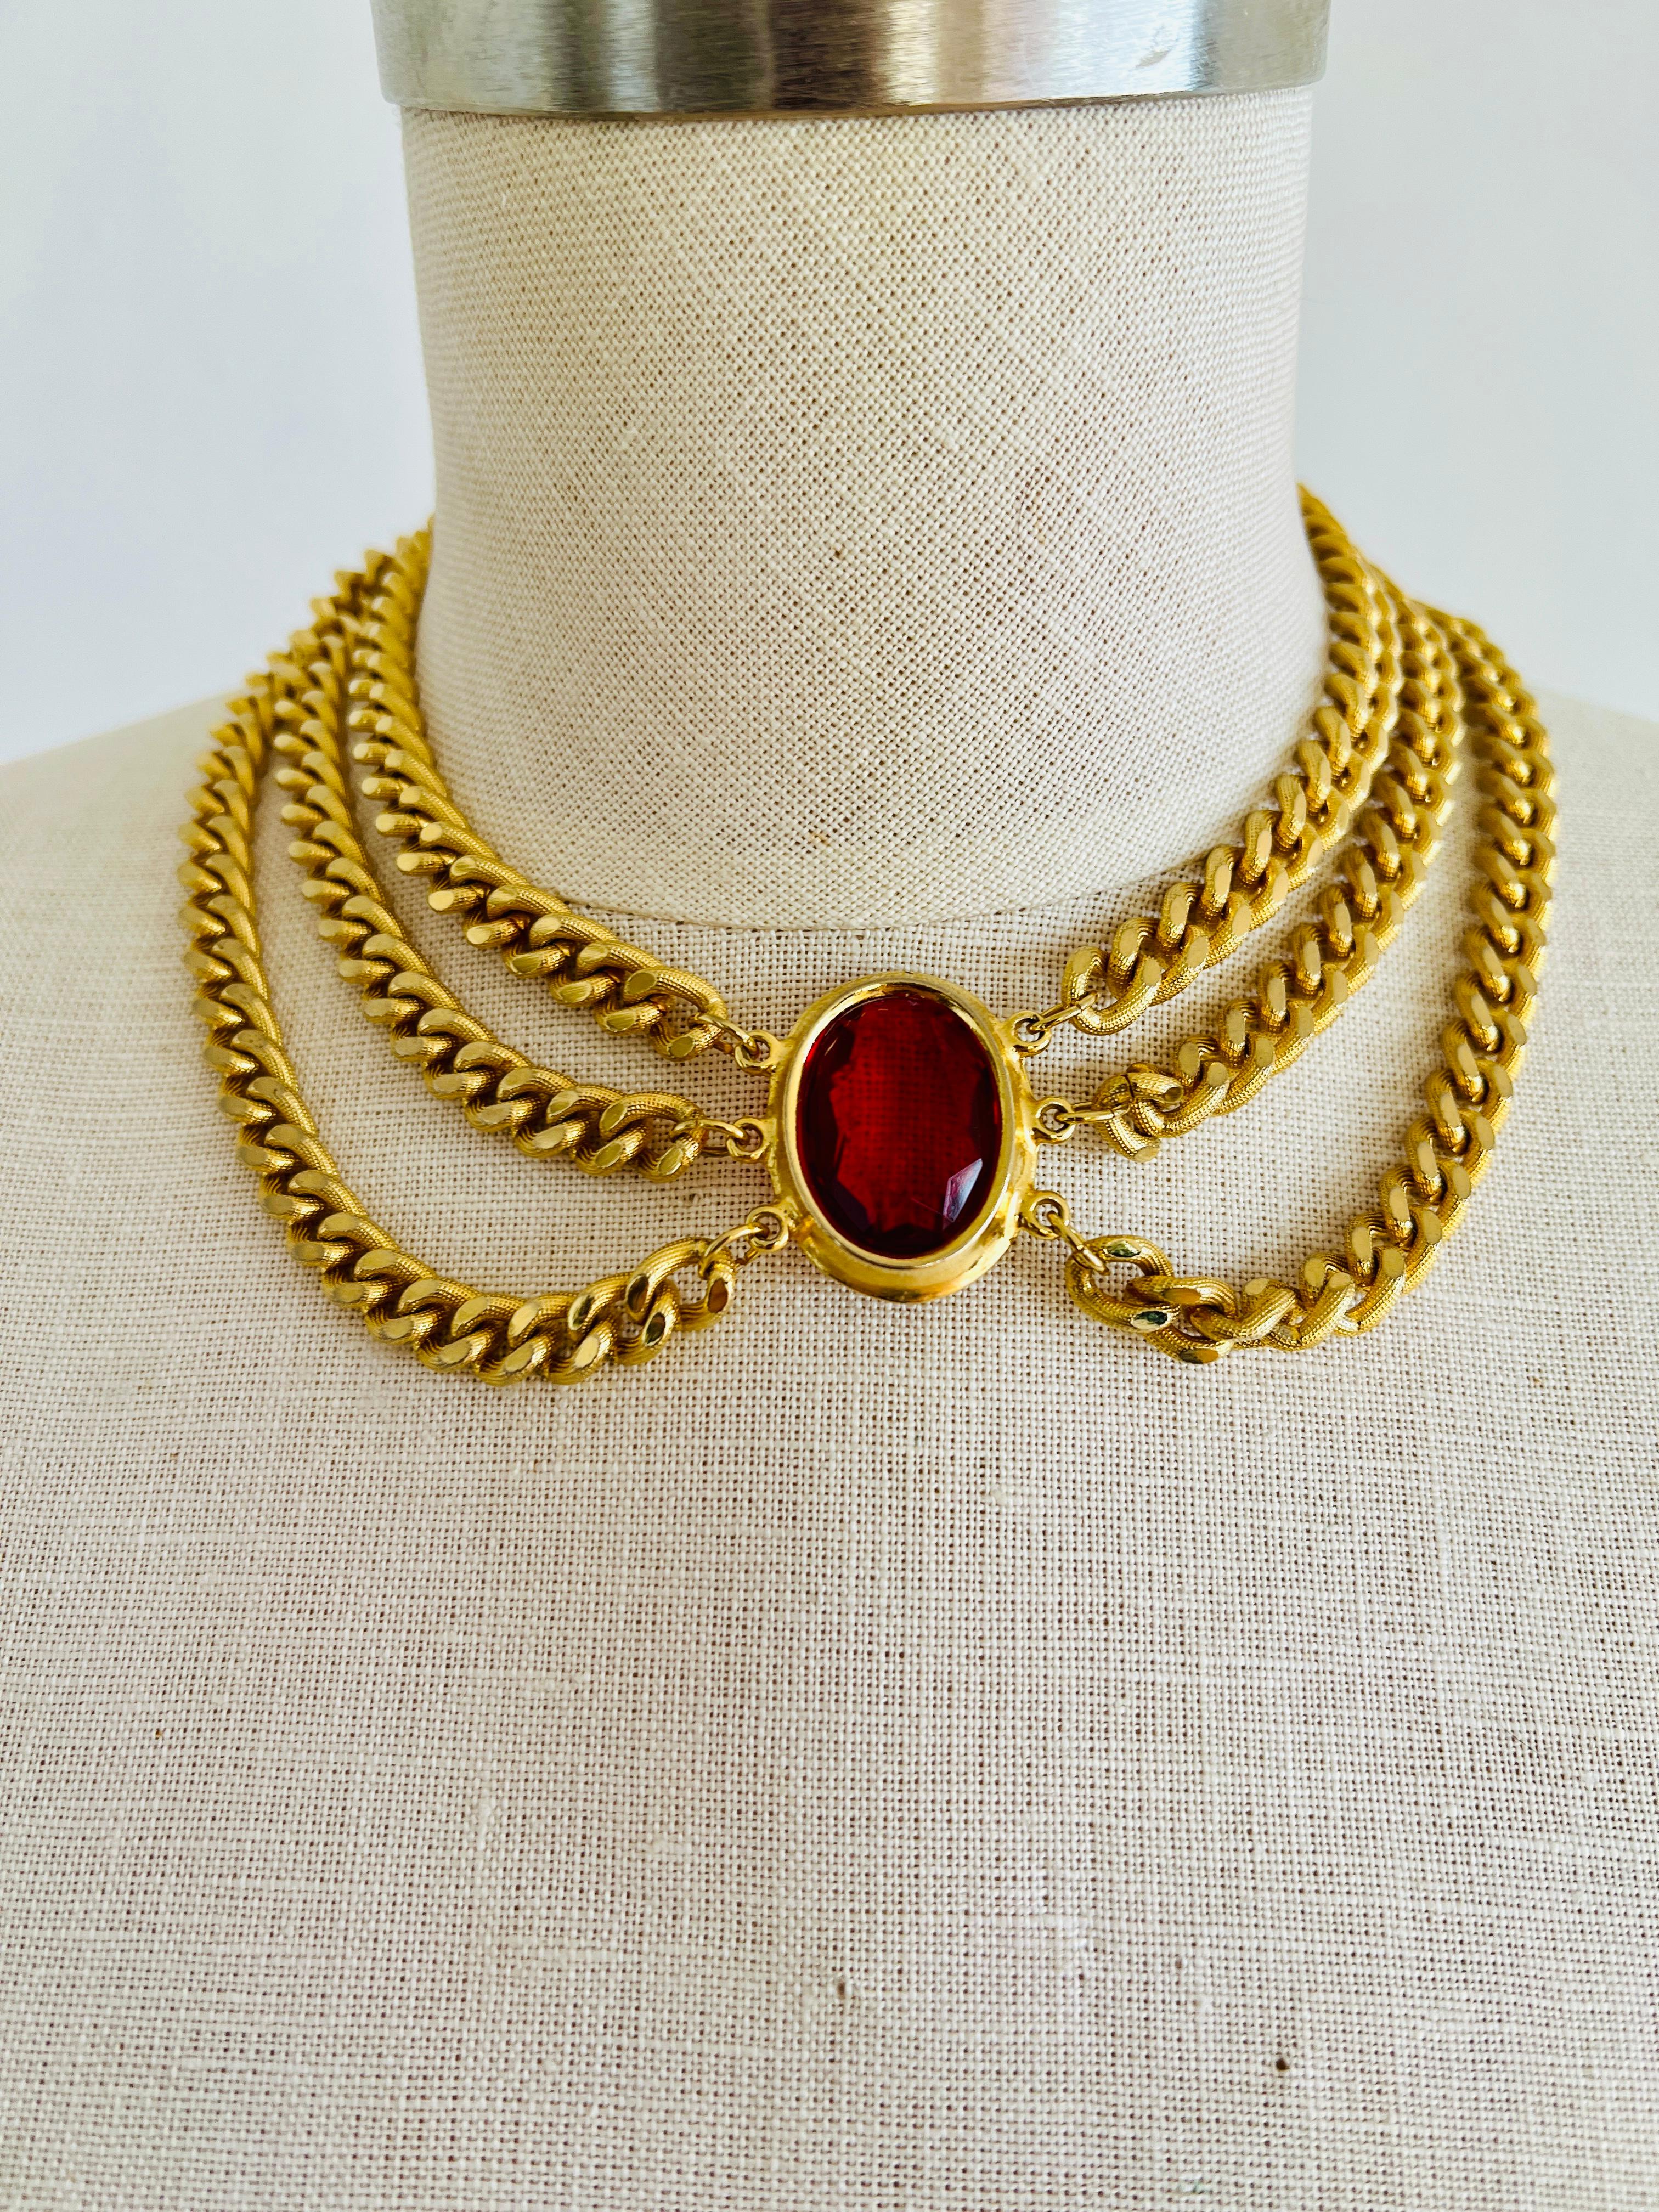 Discover the allure of this runway-inspired choker statement necklace, a composition of three weighty, gold-plated Cuban chains, converging at a striking faceted red glass oval jewel centerpiece. This necklace promises to be the highlight of any